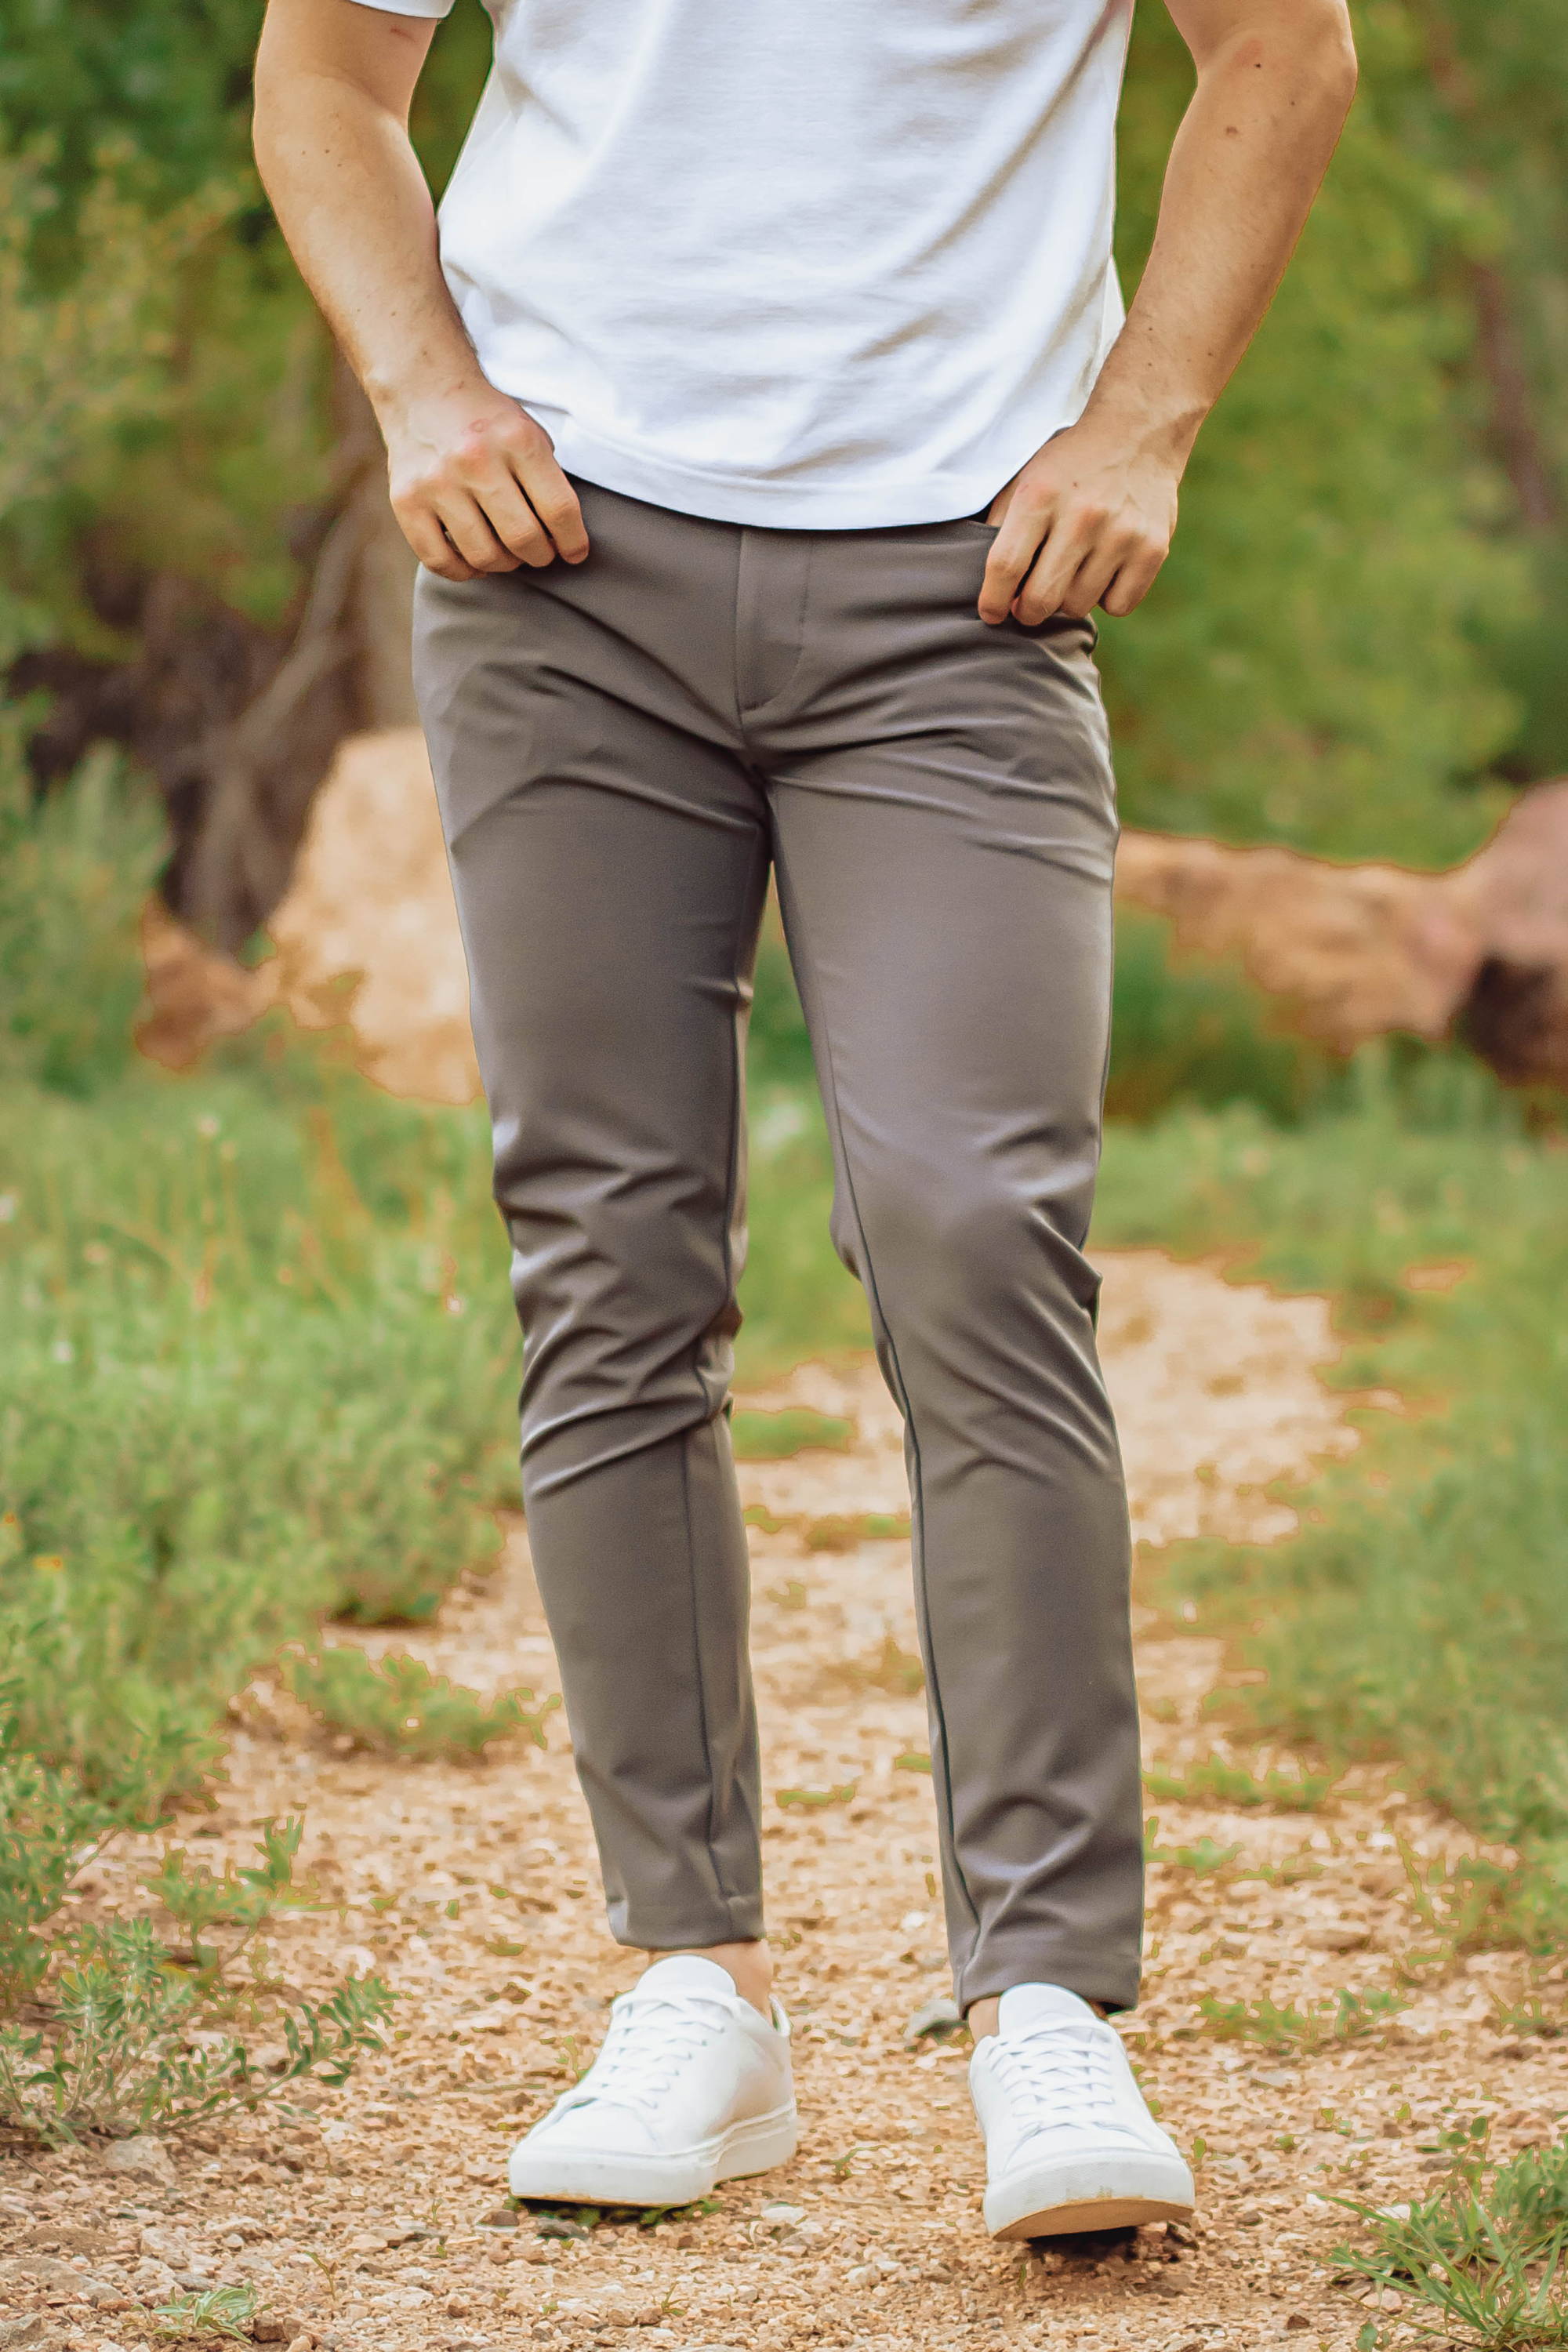 Man wearing white shoes and Gray Performance Pants from Under510.com